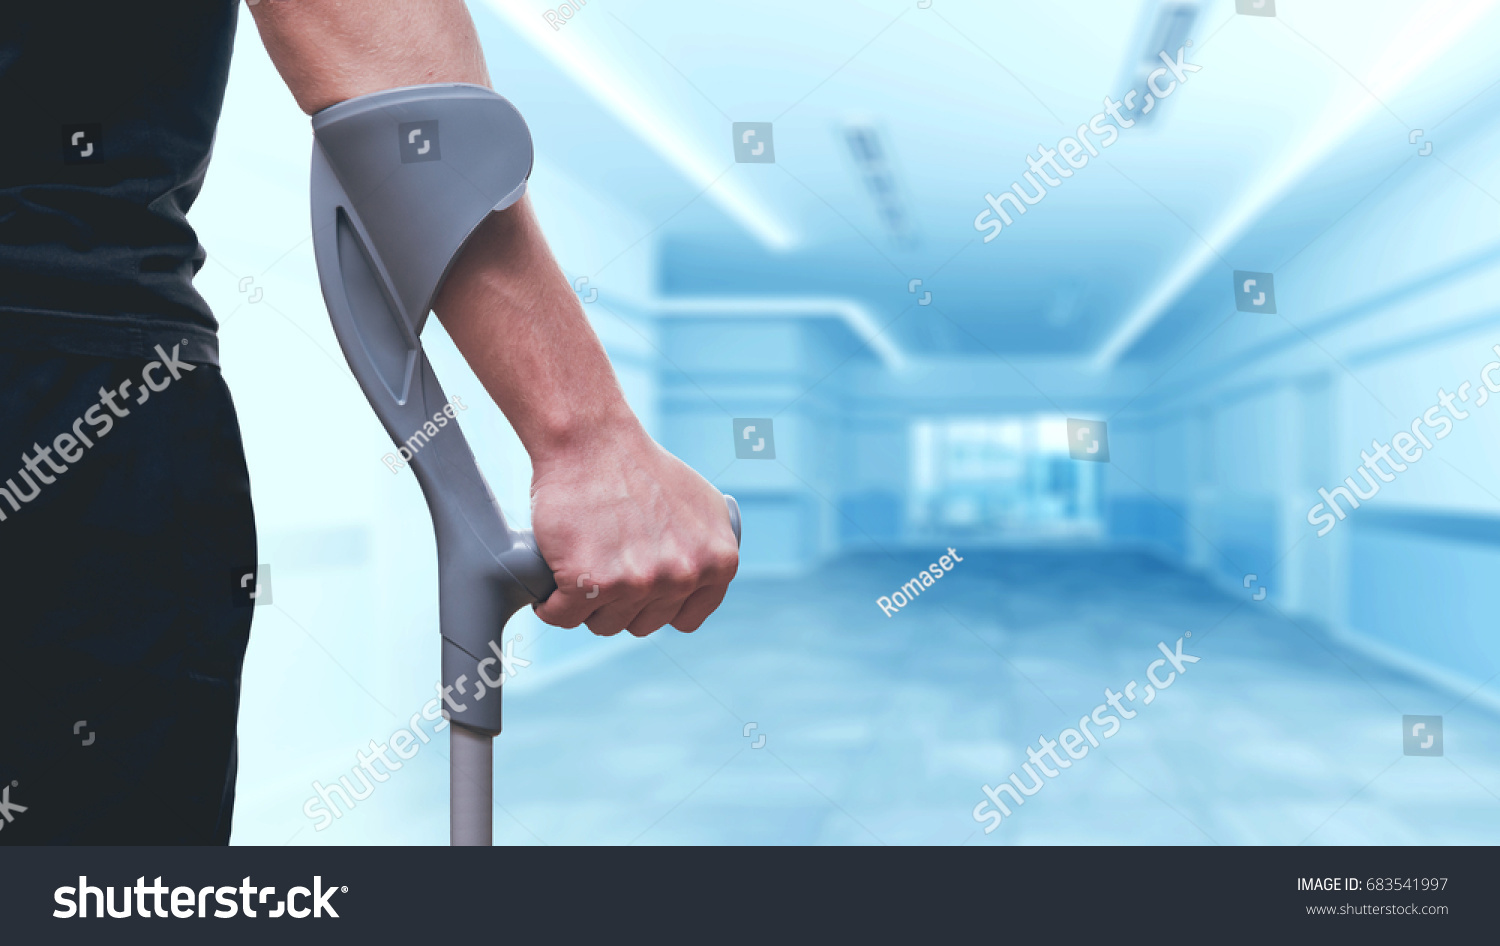 Injured man trying to walk on crutches. Blurred background #683541997